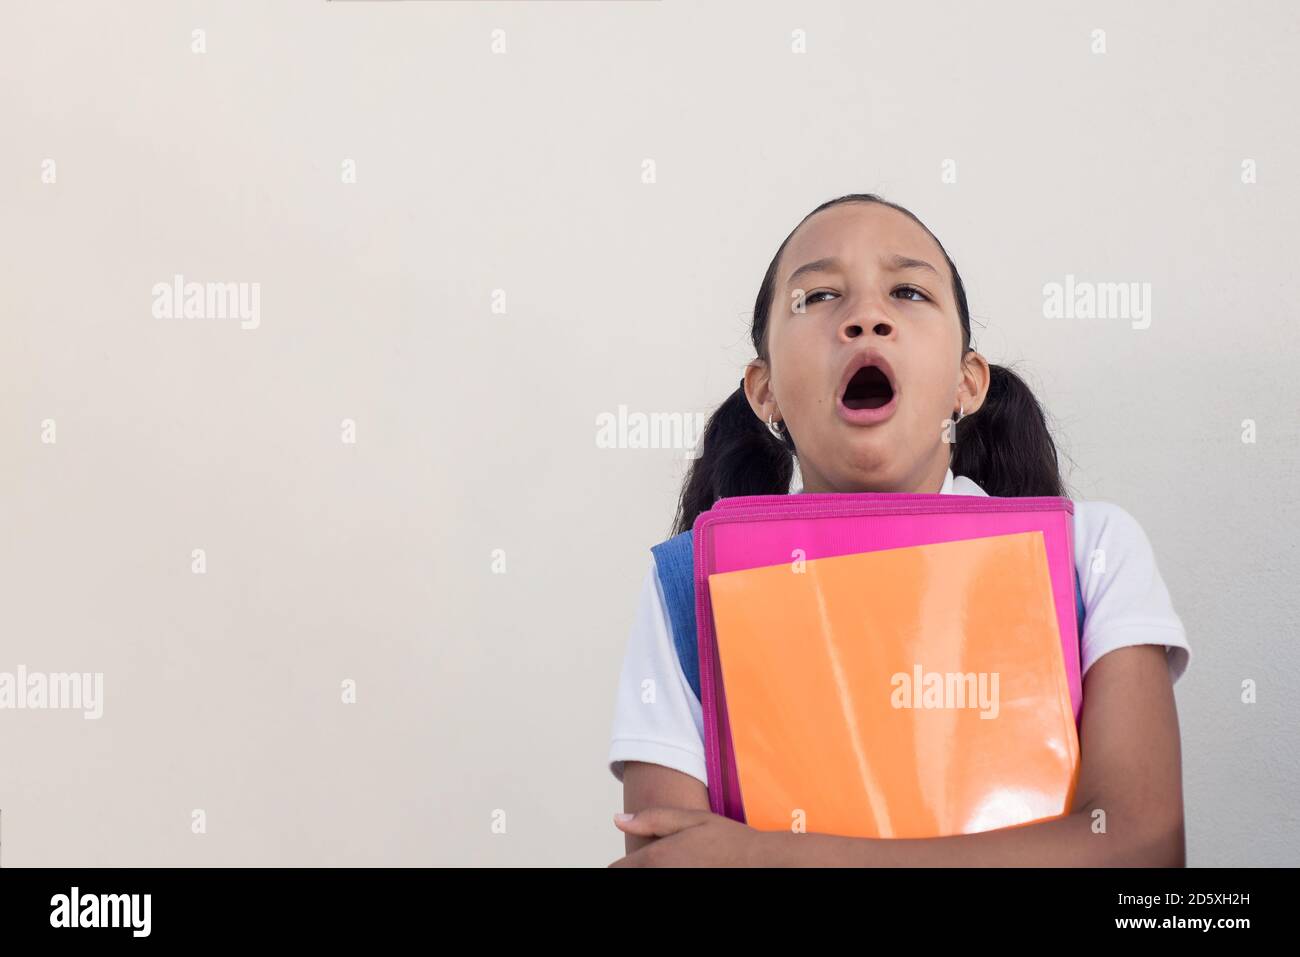 School girl yawning with notebooks and folders in hand. Boredom in school concept. Copy space for text. Stock Photo